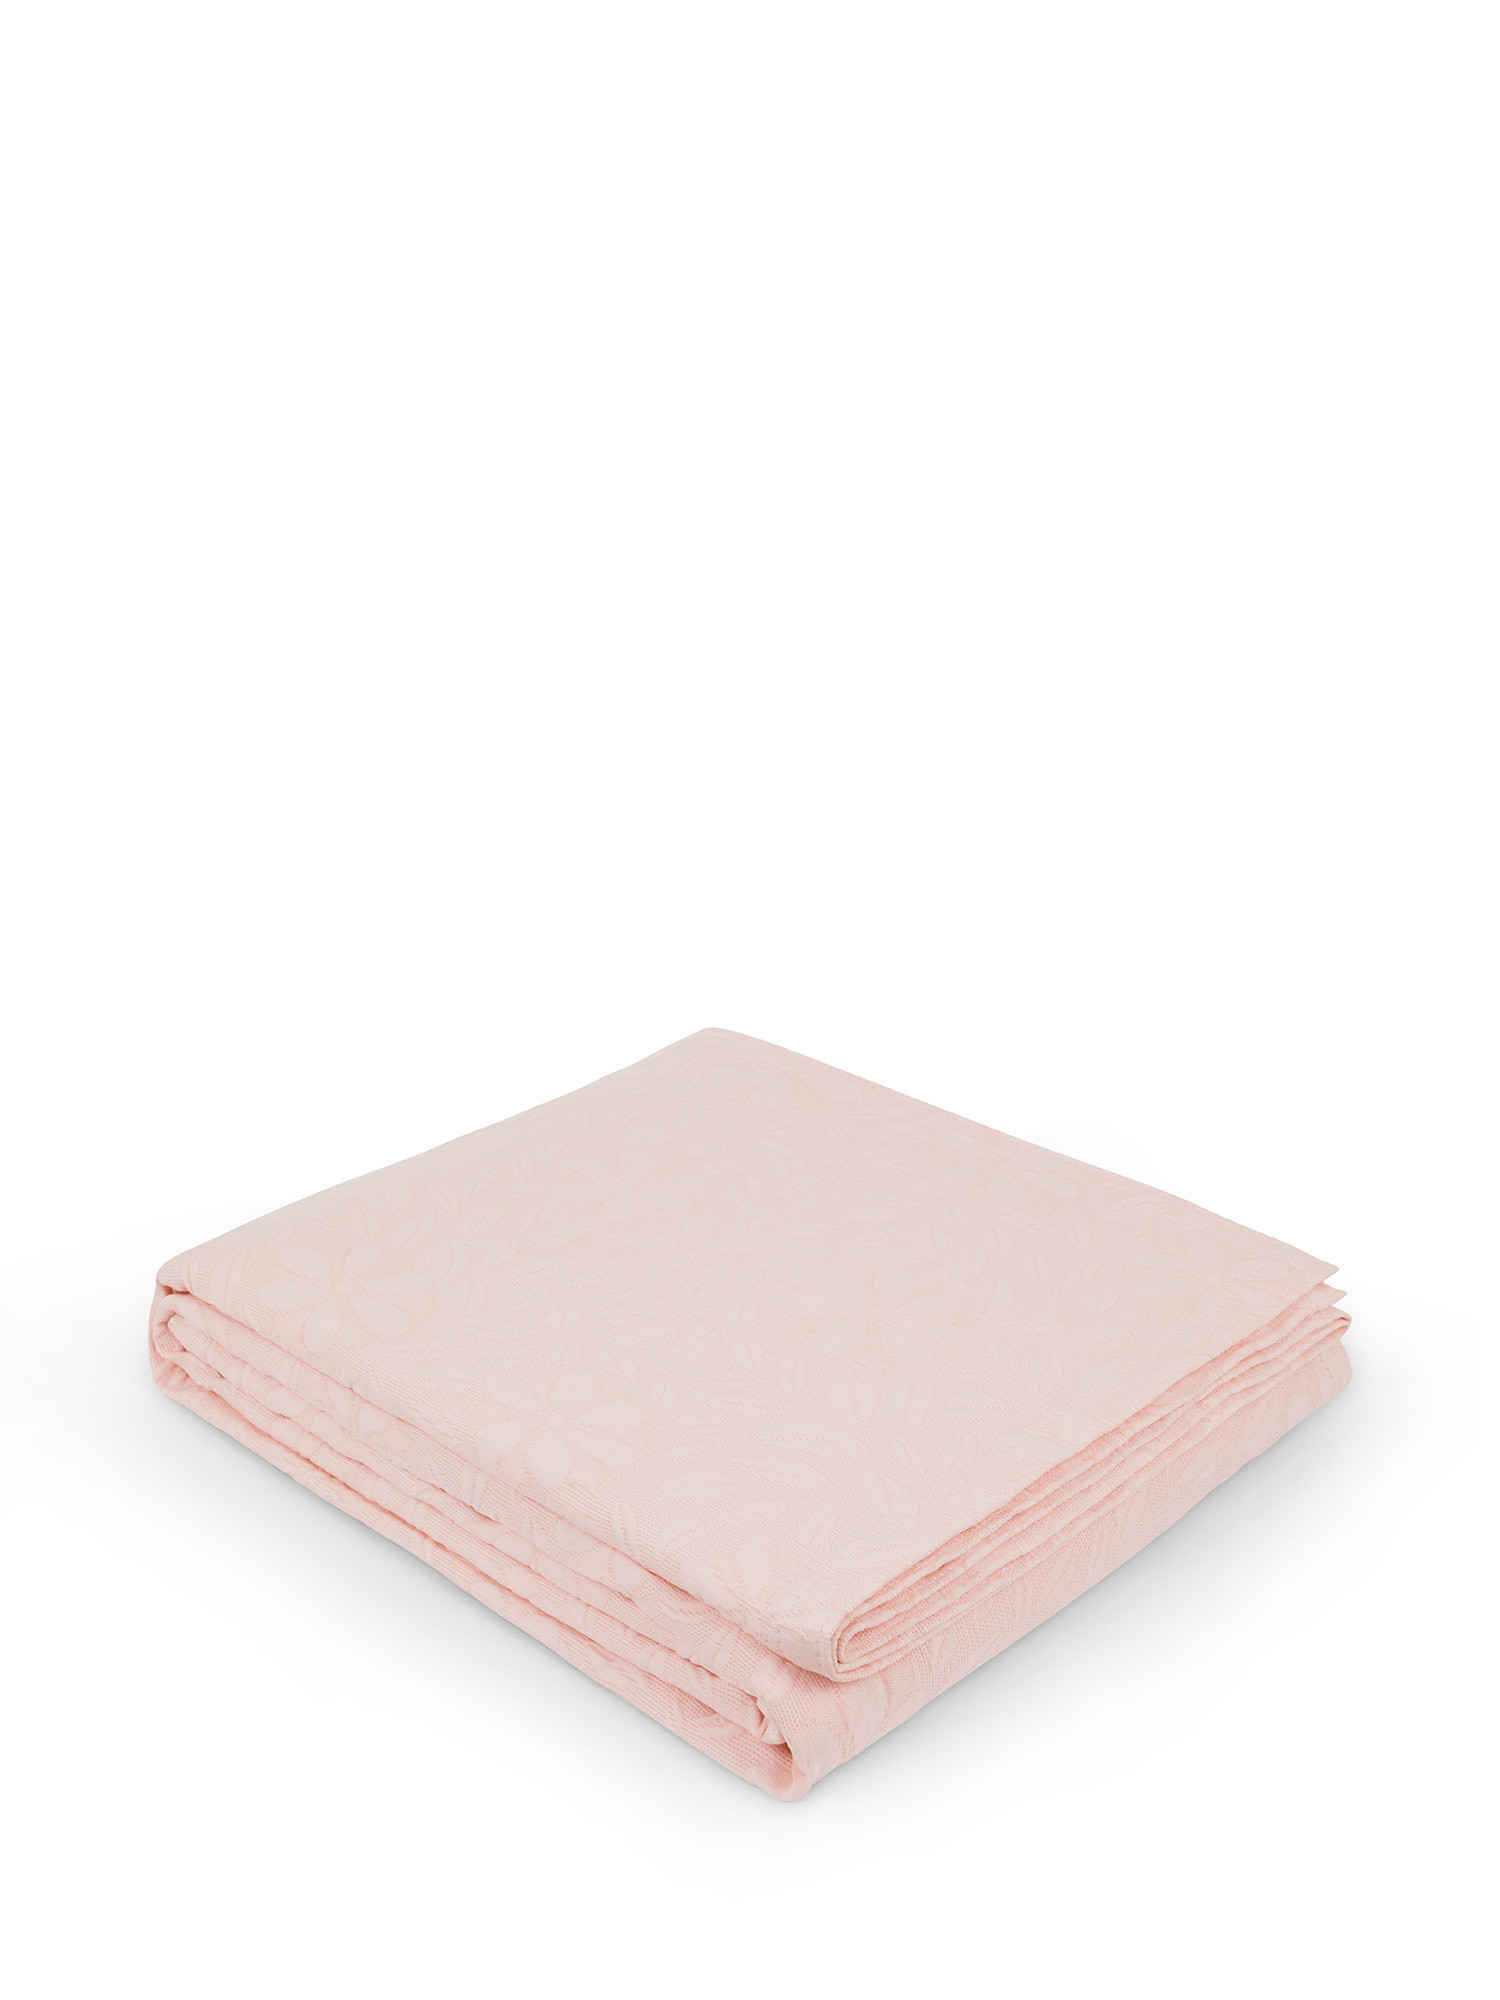 Solid color cotton bedspread with relief pattern, Pink, large image number 0